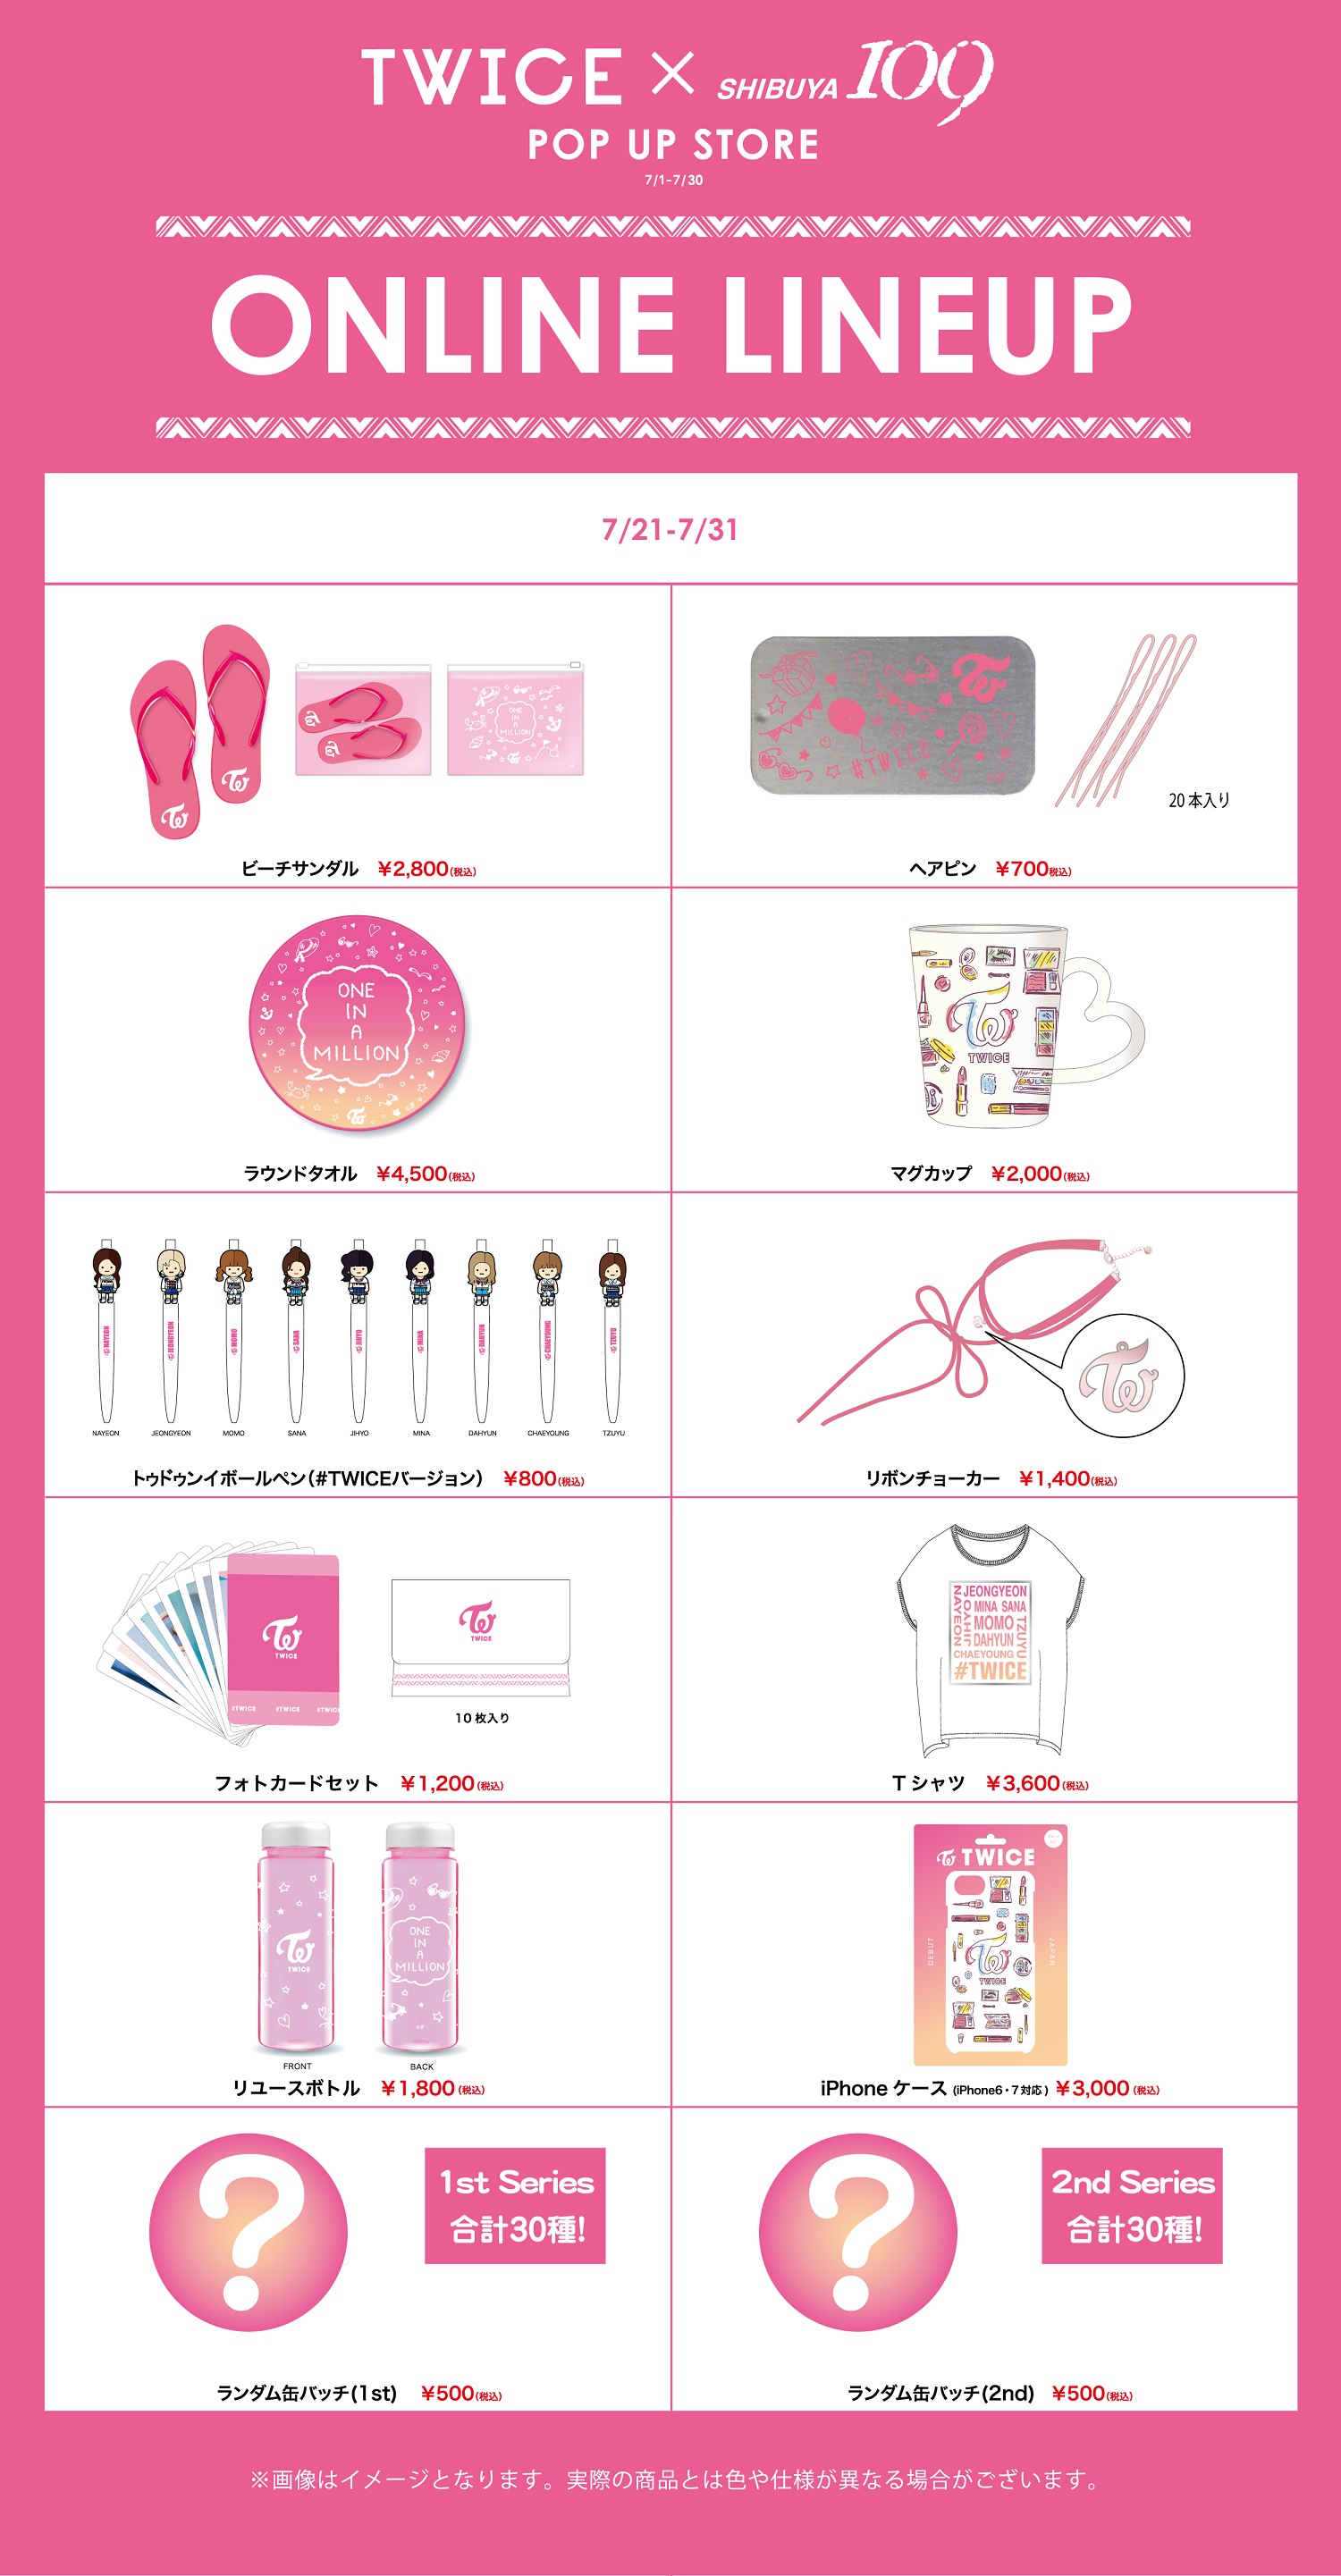 TWICE OFFICIAL FANCLUB ONCE JAPAN